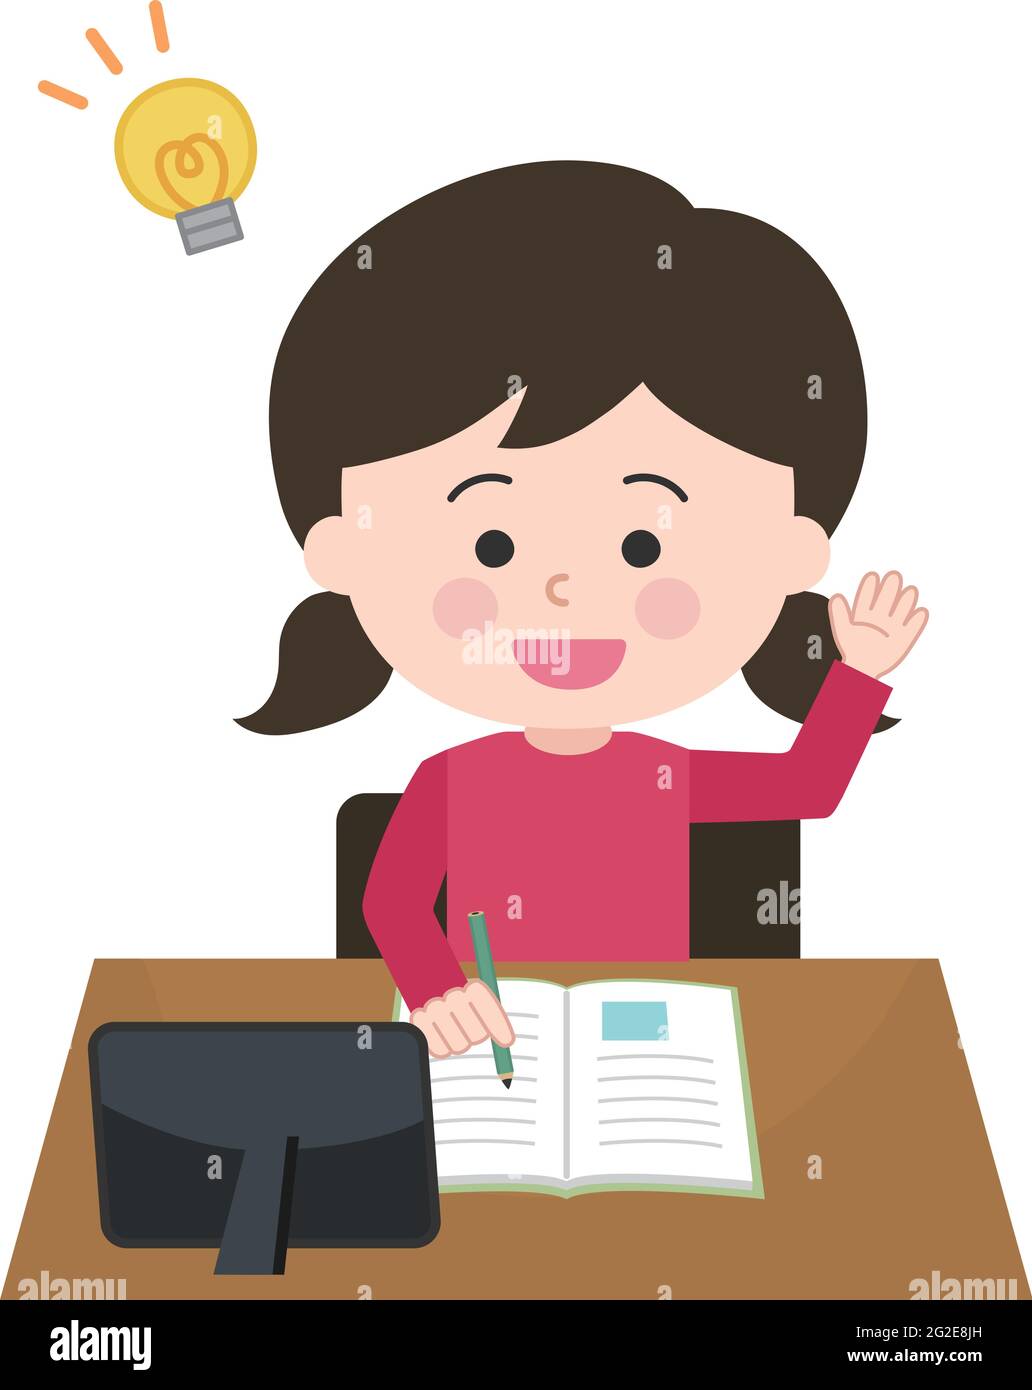 A girl studying happily on her tablet. Vector illustration isolated on white background. Stock Vector